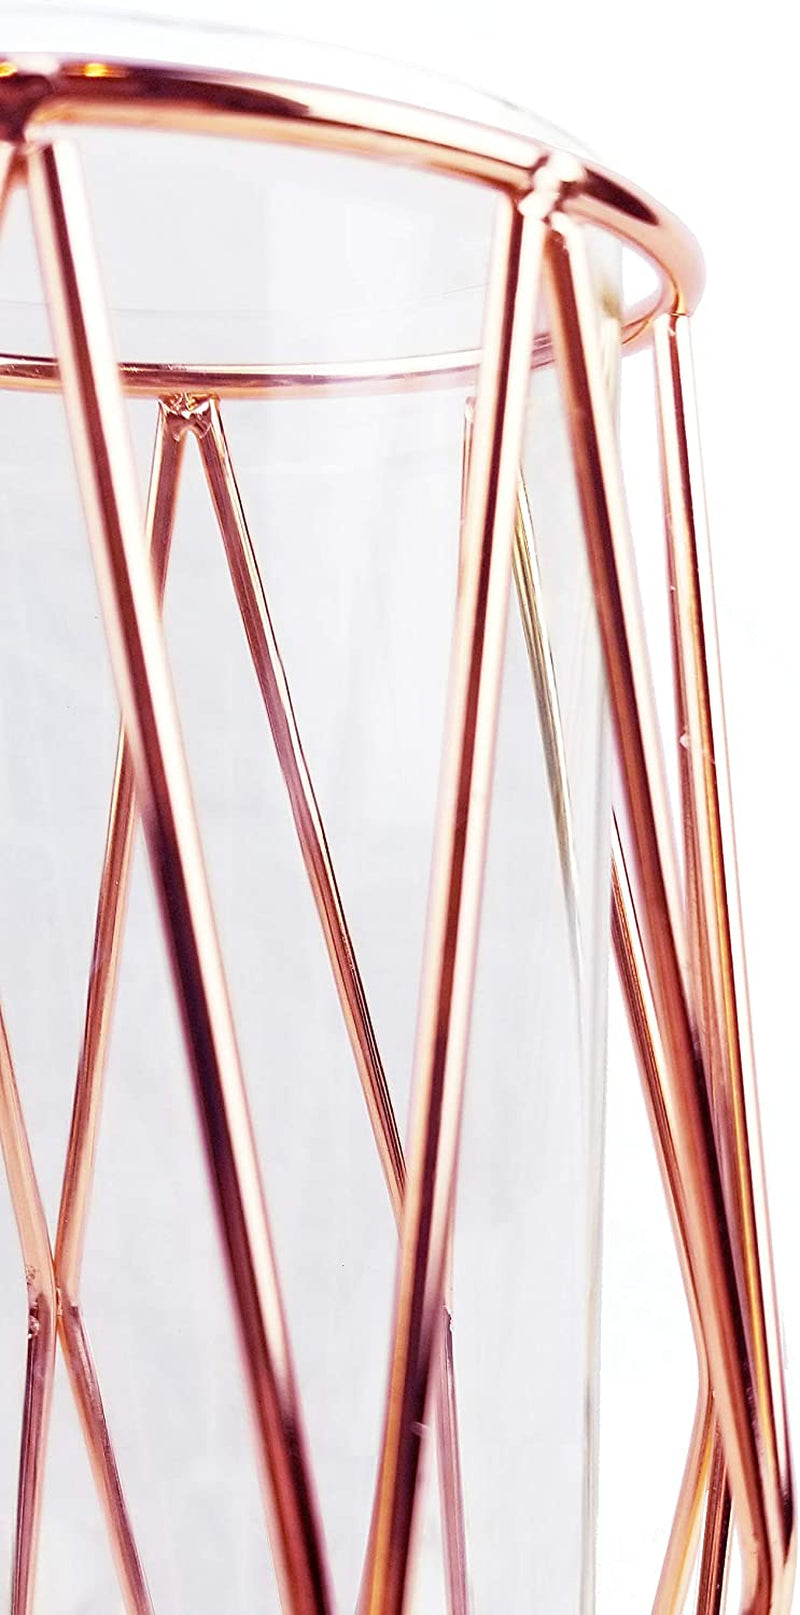 Rose Gold Glass Vase with Geometric Stand - 11 Inch Tall for Wedding or Home Decor